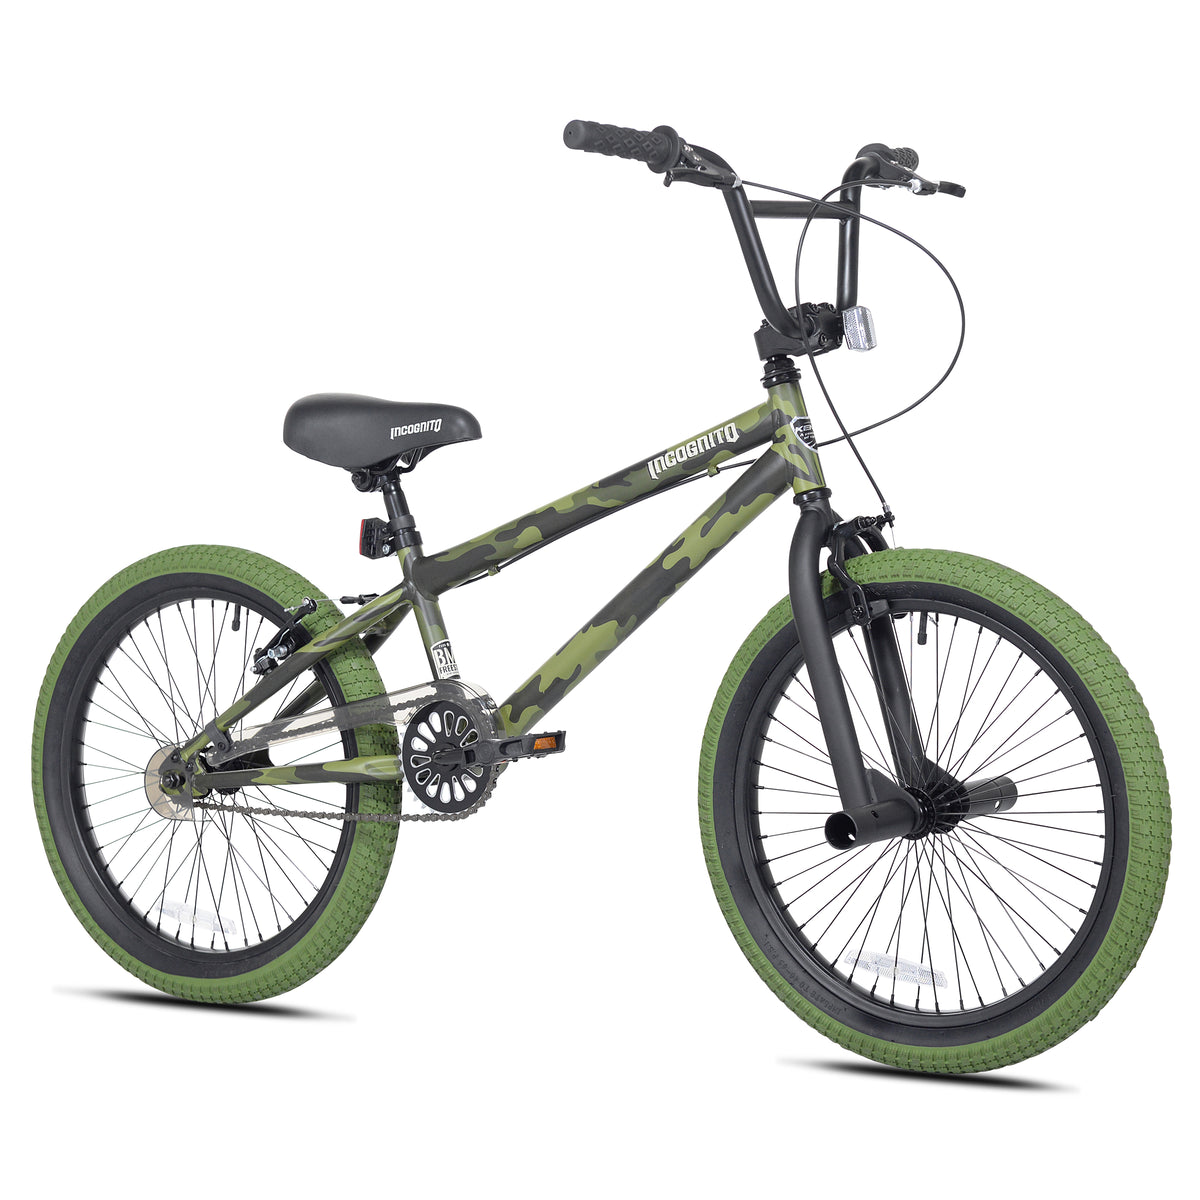 20" Kent Incognito | BMX Bike for Kids Ages 7-13